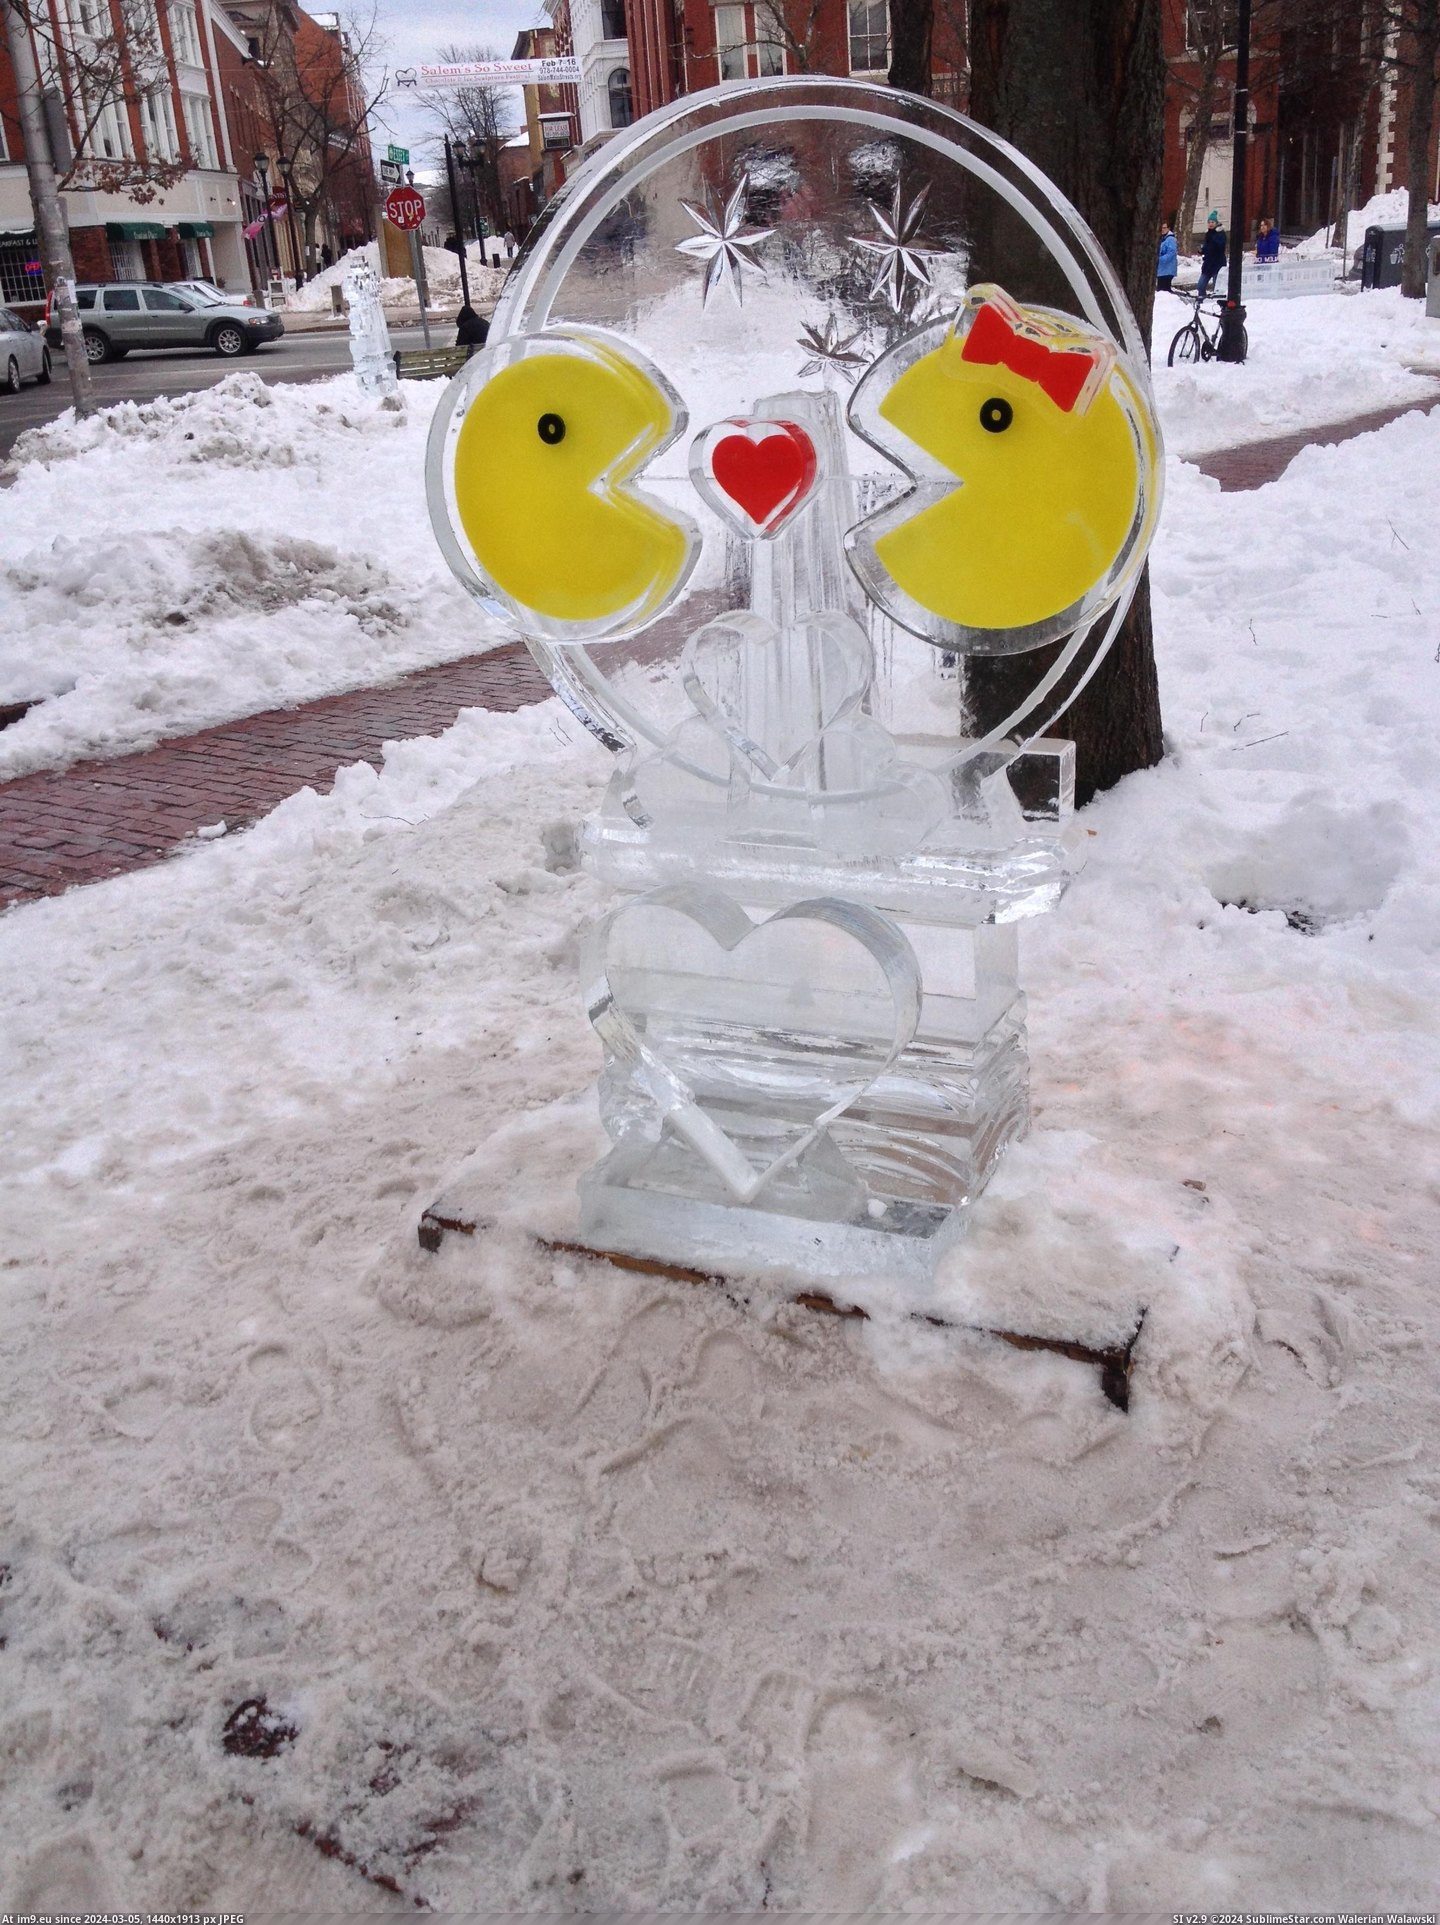 #Gaming #Love #Day #Downtown #Pac #Giving #Valentines #Salem [Gaming] Downtown Salem giving some PAC love for Valentines day. Pic. (Изображение из альбом My r/GAMING favs))